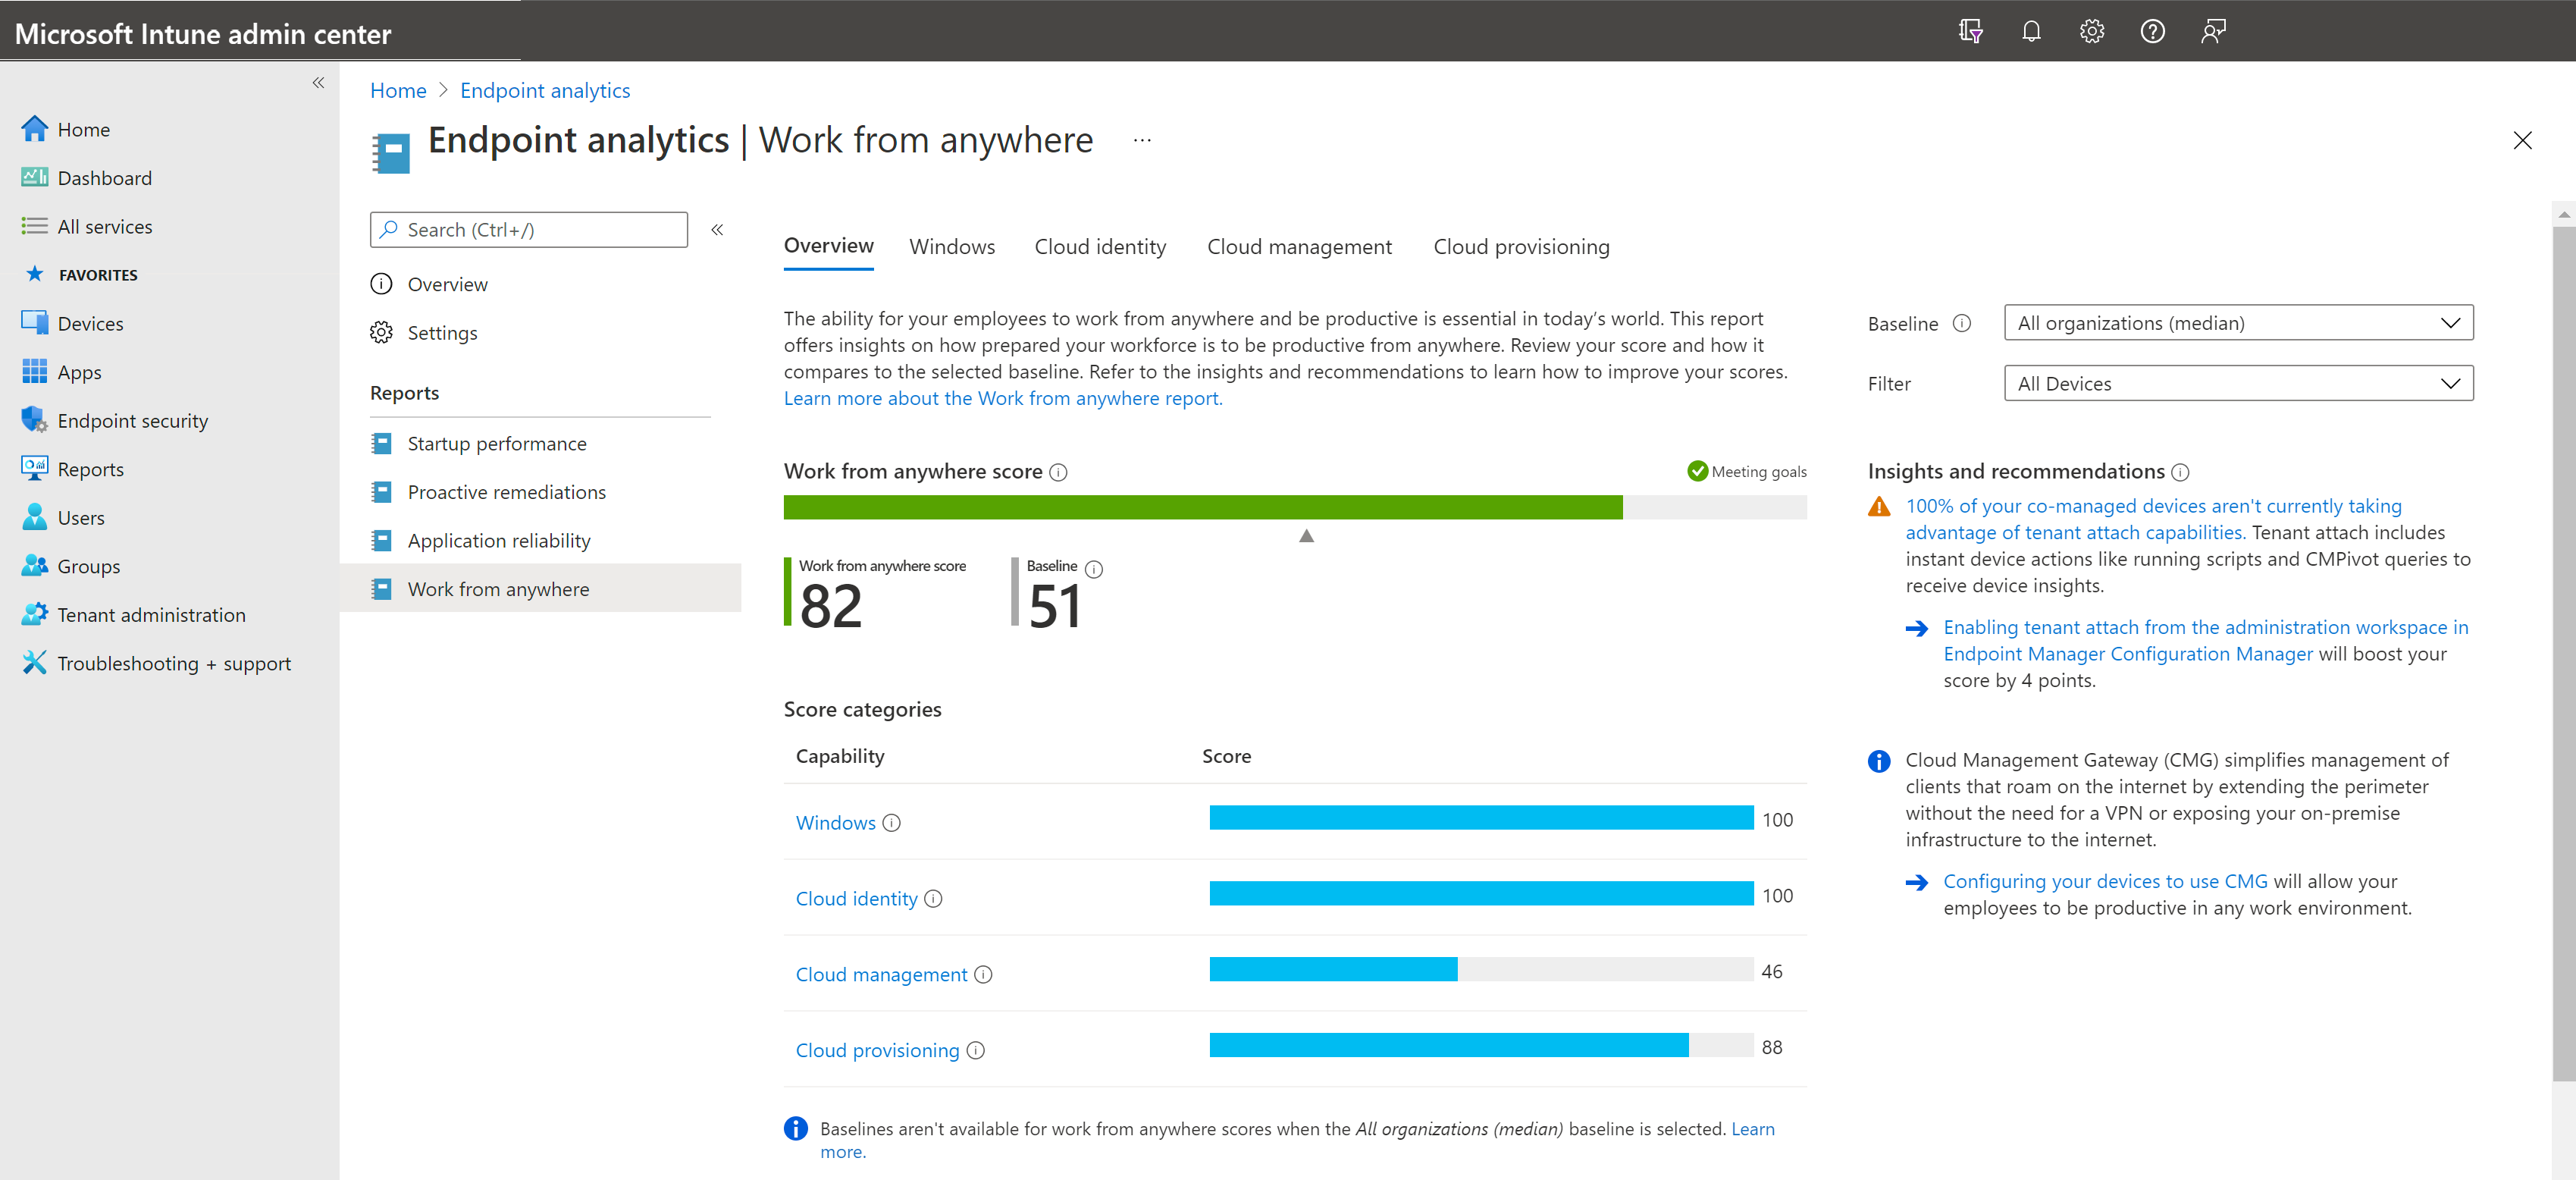 Screenshot of the Work from anywhere report showing the scores and metrics